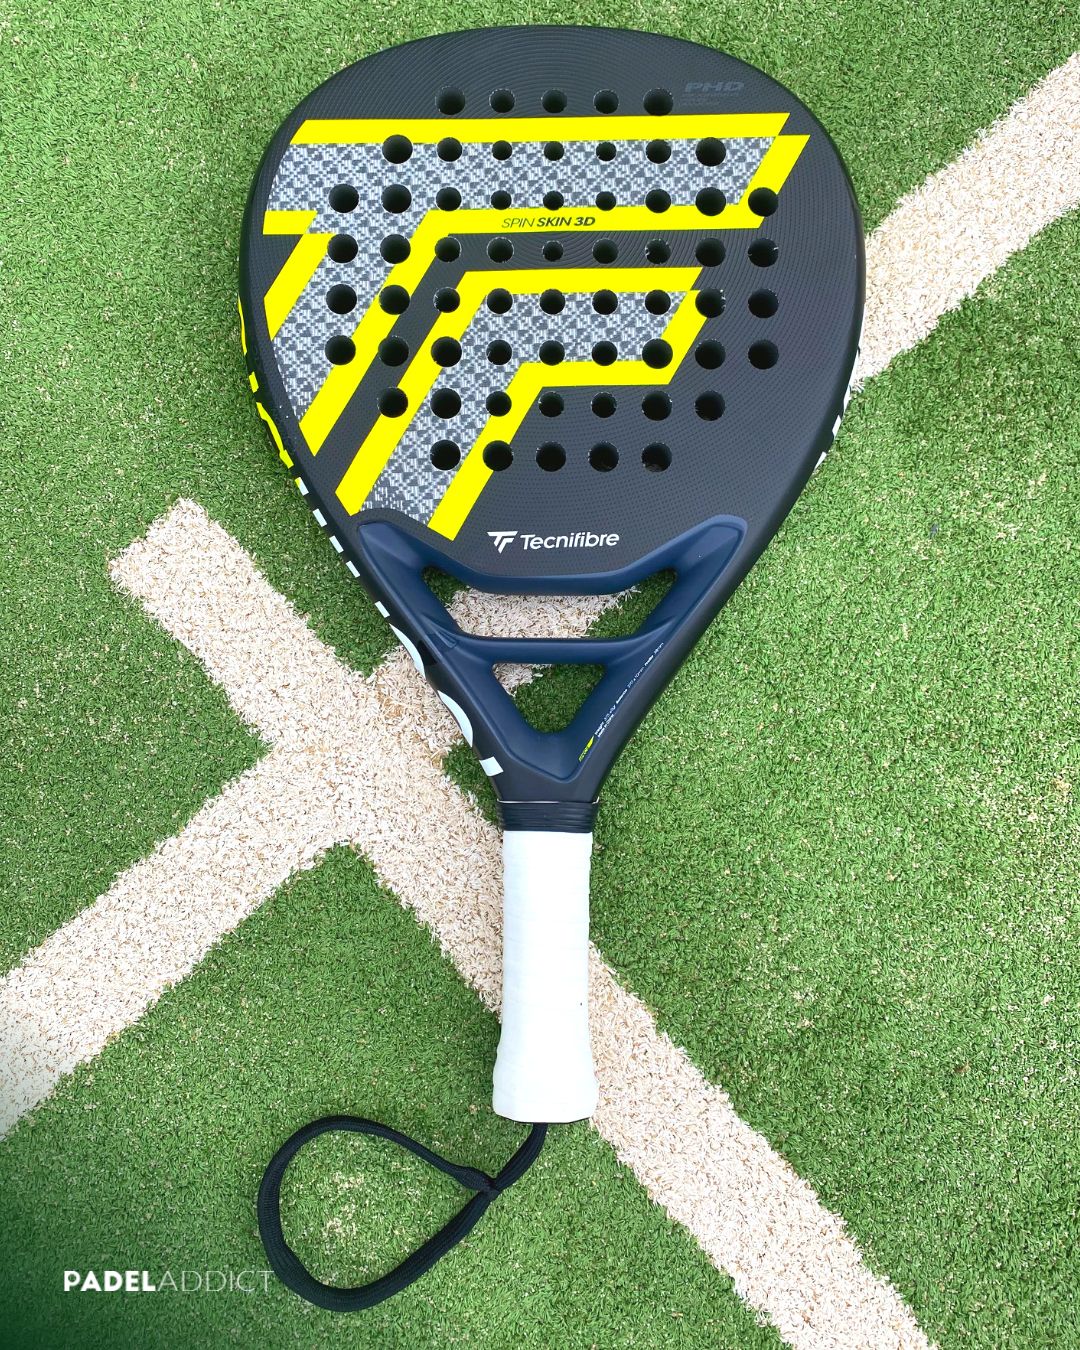 In general, the Wall Breaker 375 is an offensive racket, which maximises the power of attacking shots.